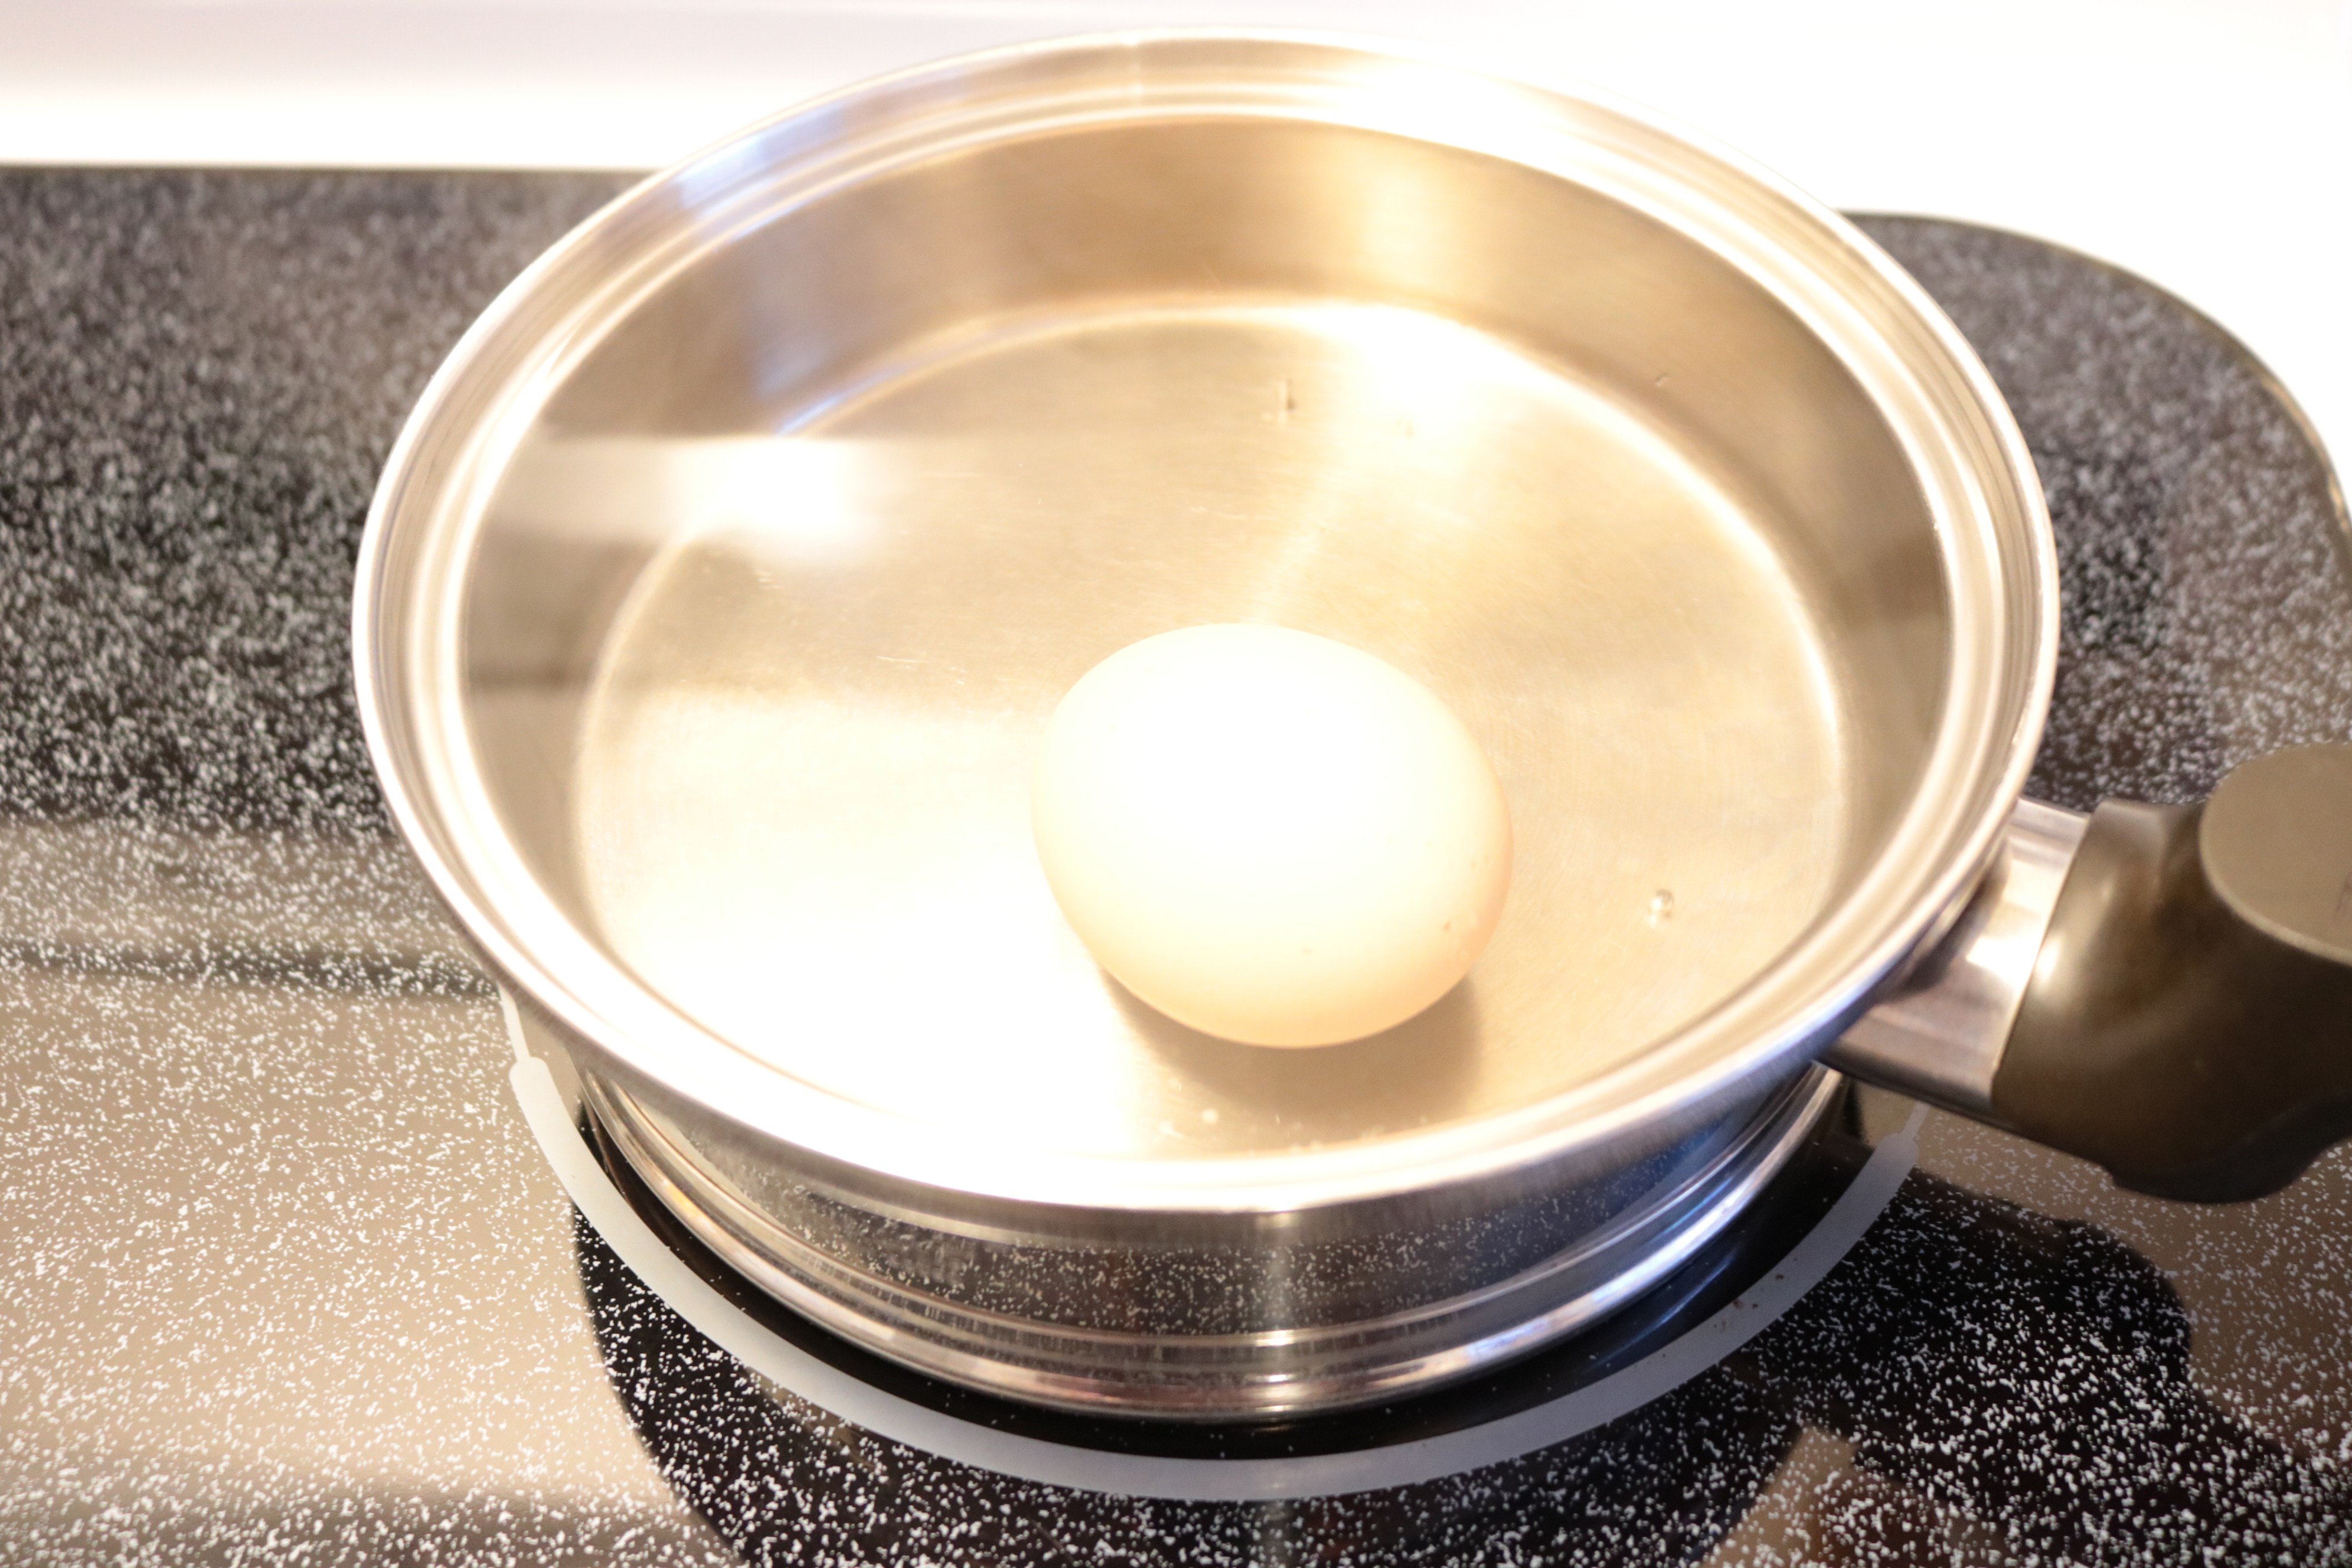 Boiling egg to make miracle salve.